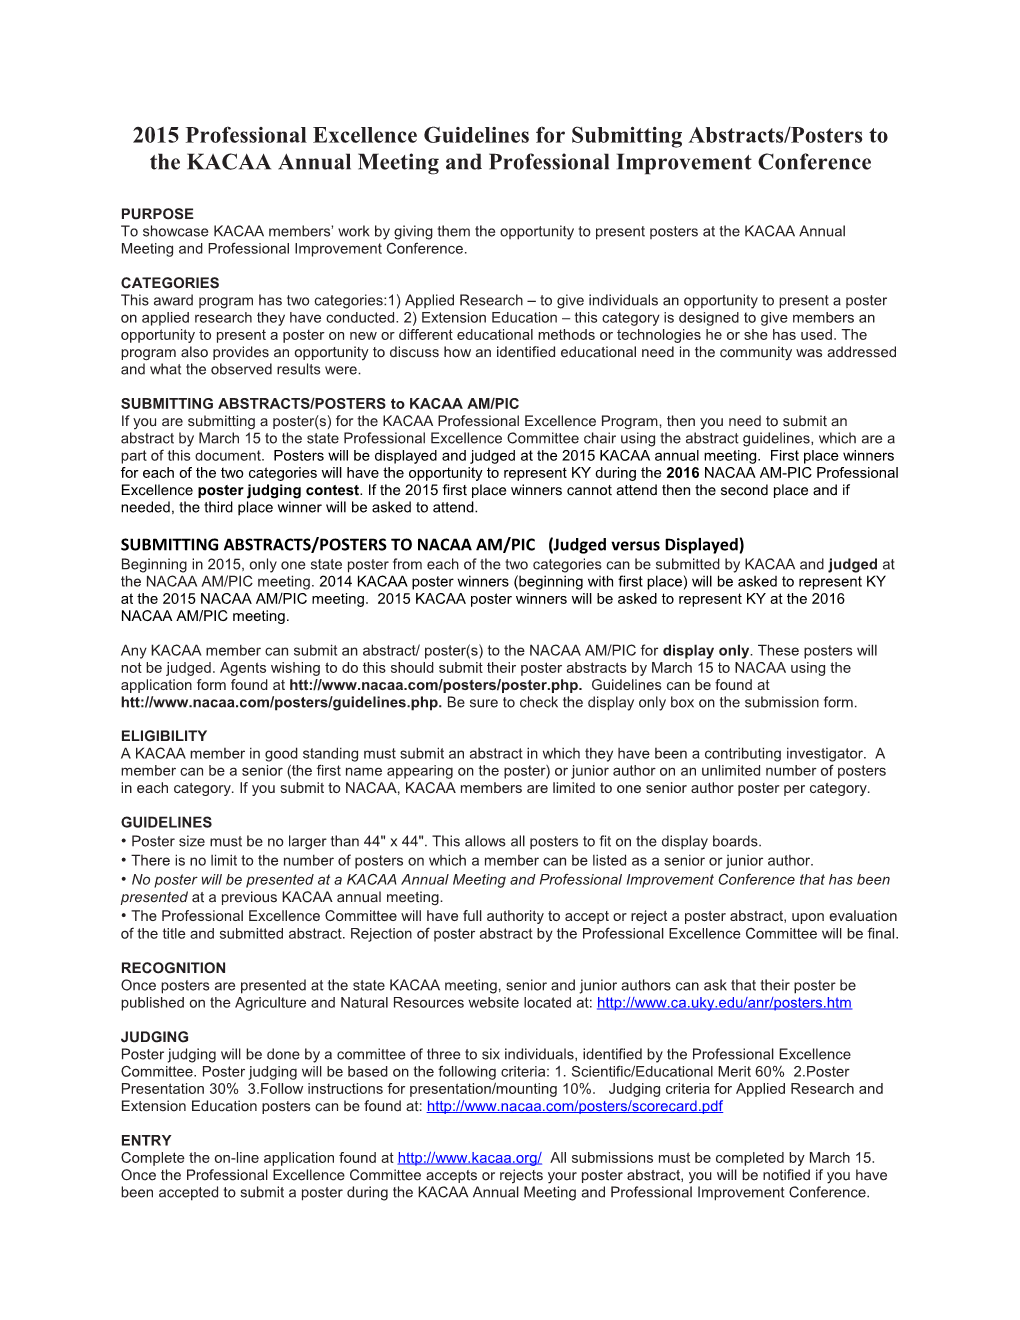 2015 Professional Excellence Guidelinesfor Submitting Abstracts/Posters to the KACAA Annual